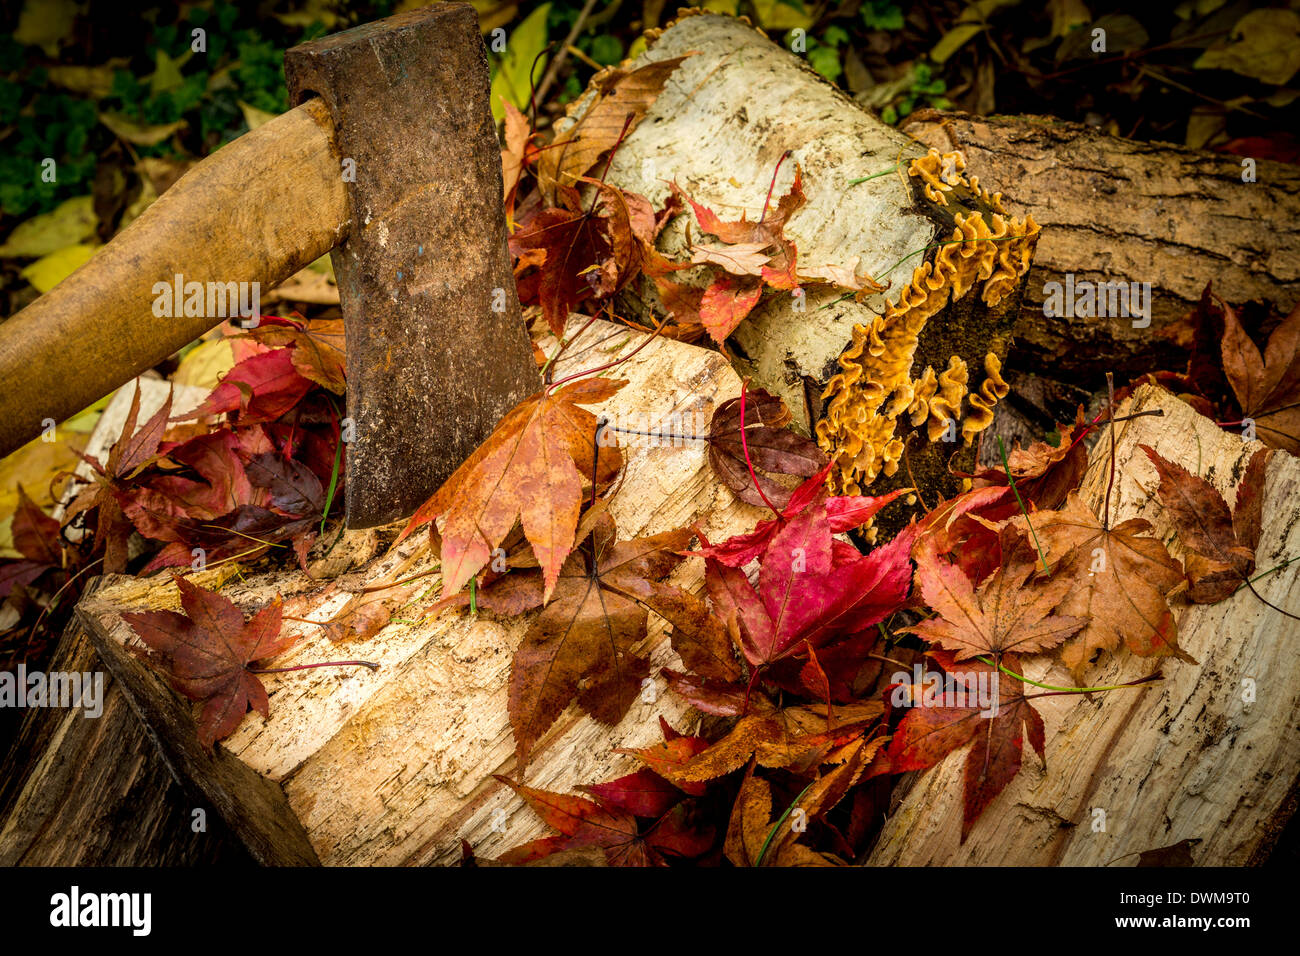 An autumn scene of an axe and logs on the wood block with fallen leaves. Stock Photo